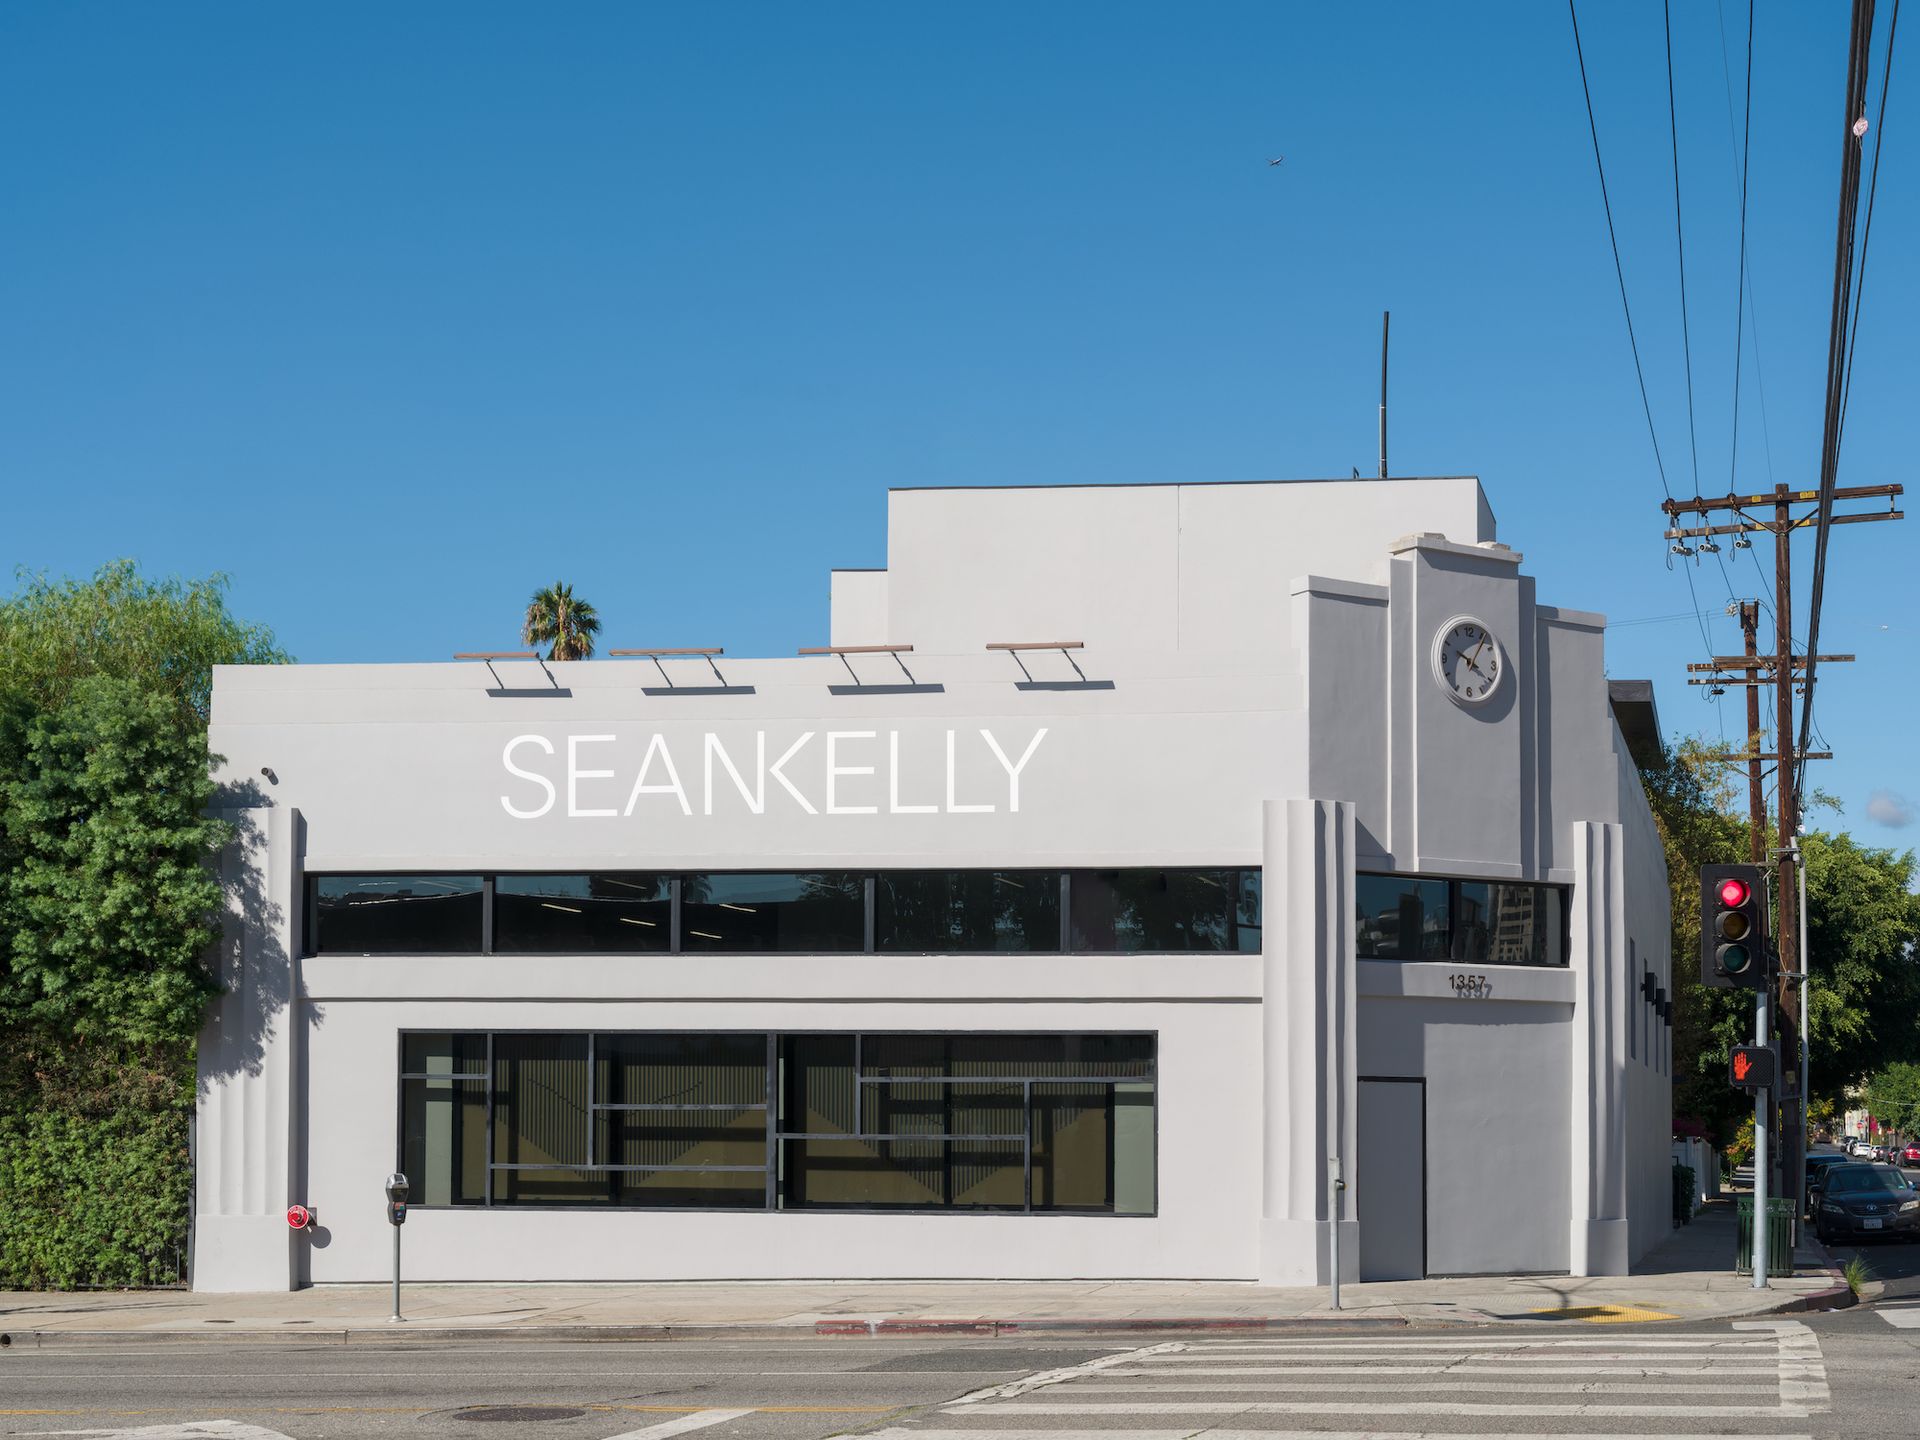 The exterior of Sean Kelly Gallery's Los Angeles space Photo by Jeff McLane, courtesy Sean Kelly Gallery